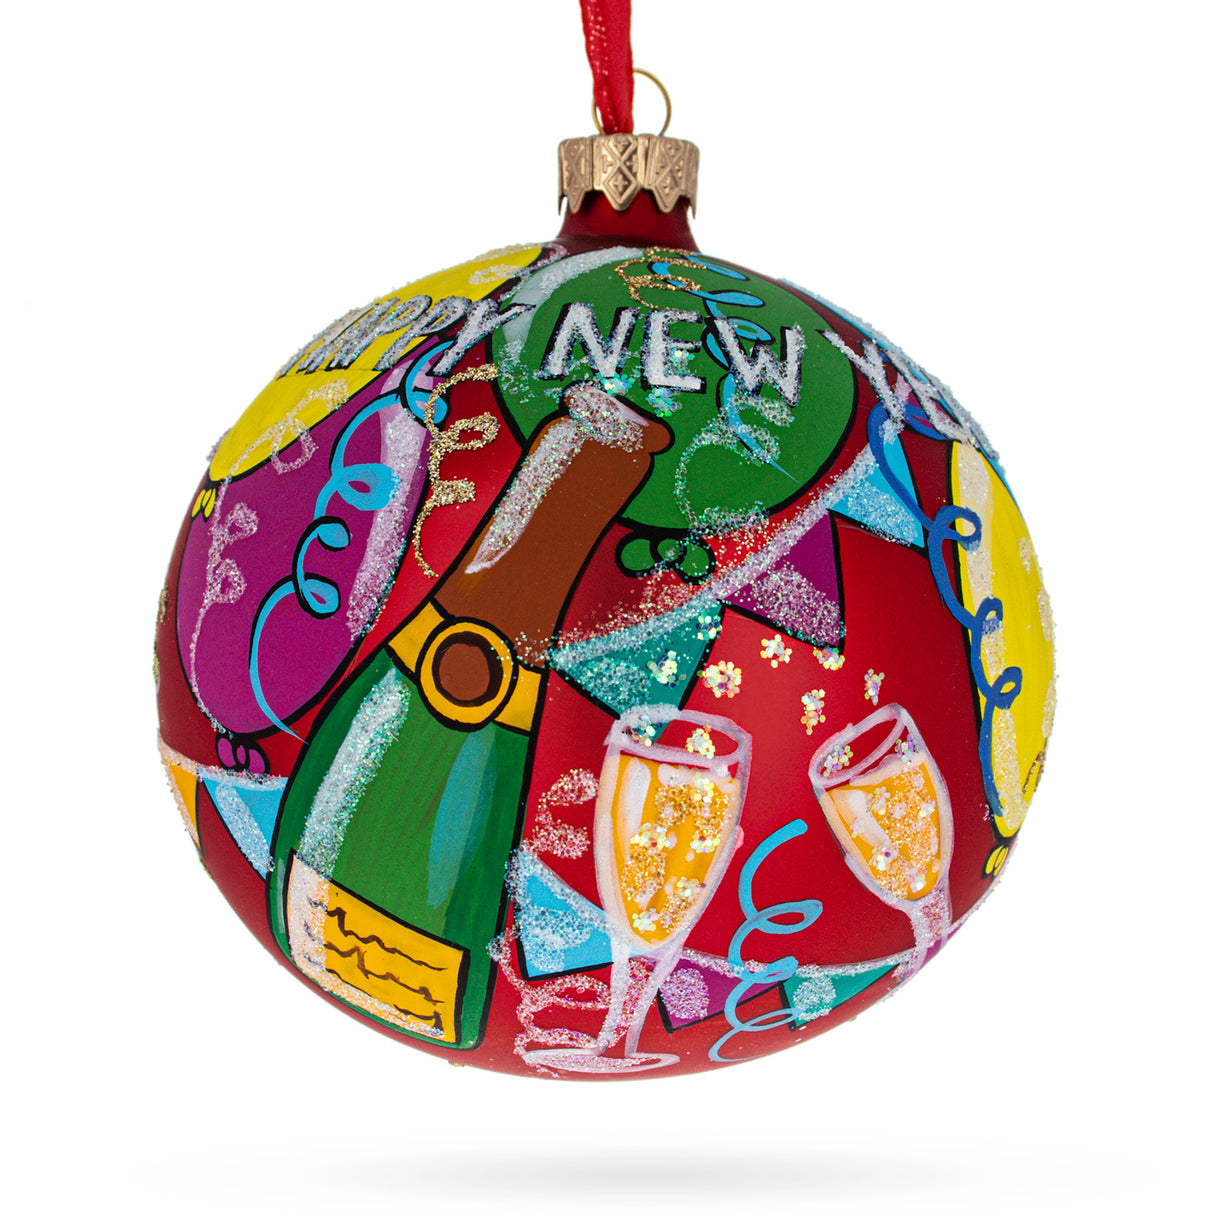 Happy New Year: Festive Celebration Blown Glass Ball Christmas Ornament 4 Inches in Multi color, Round shape